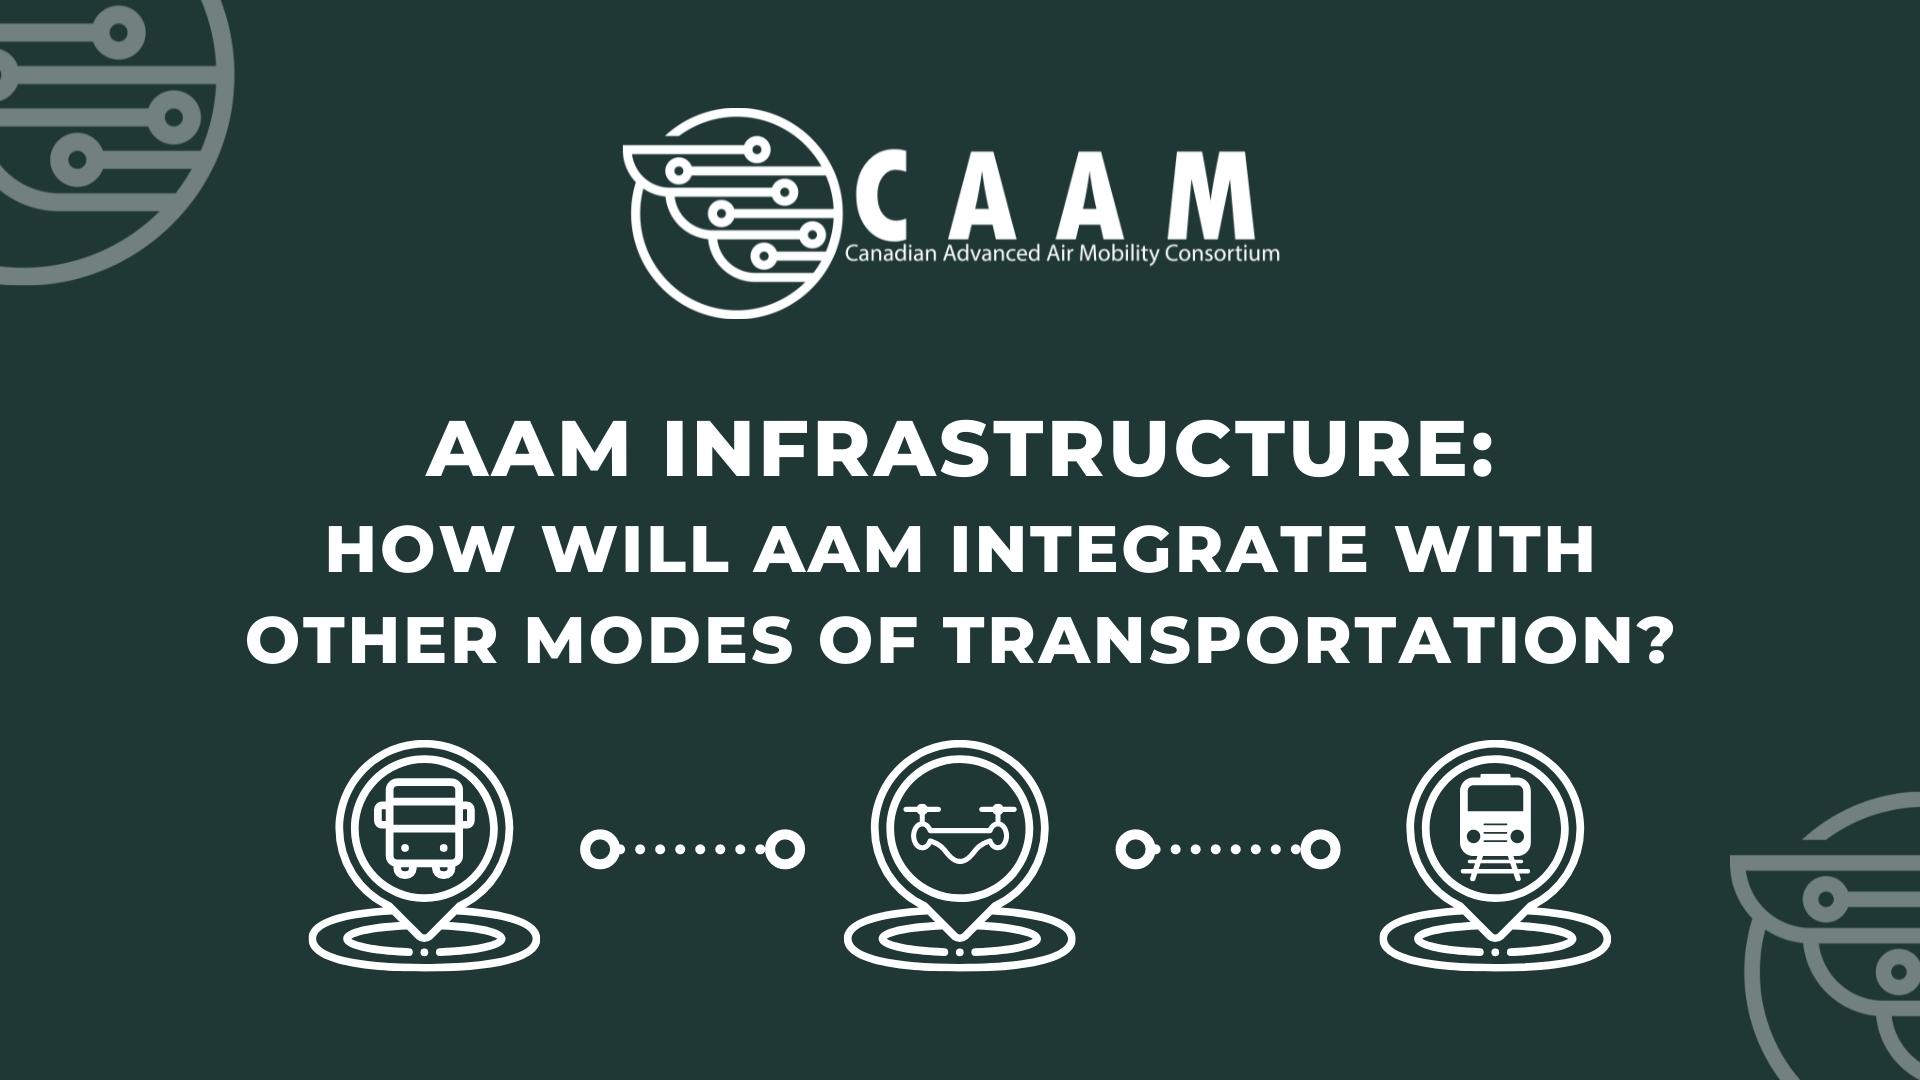 AAM infrastructure - How will AAM integrate with other modes of transportation